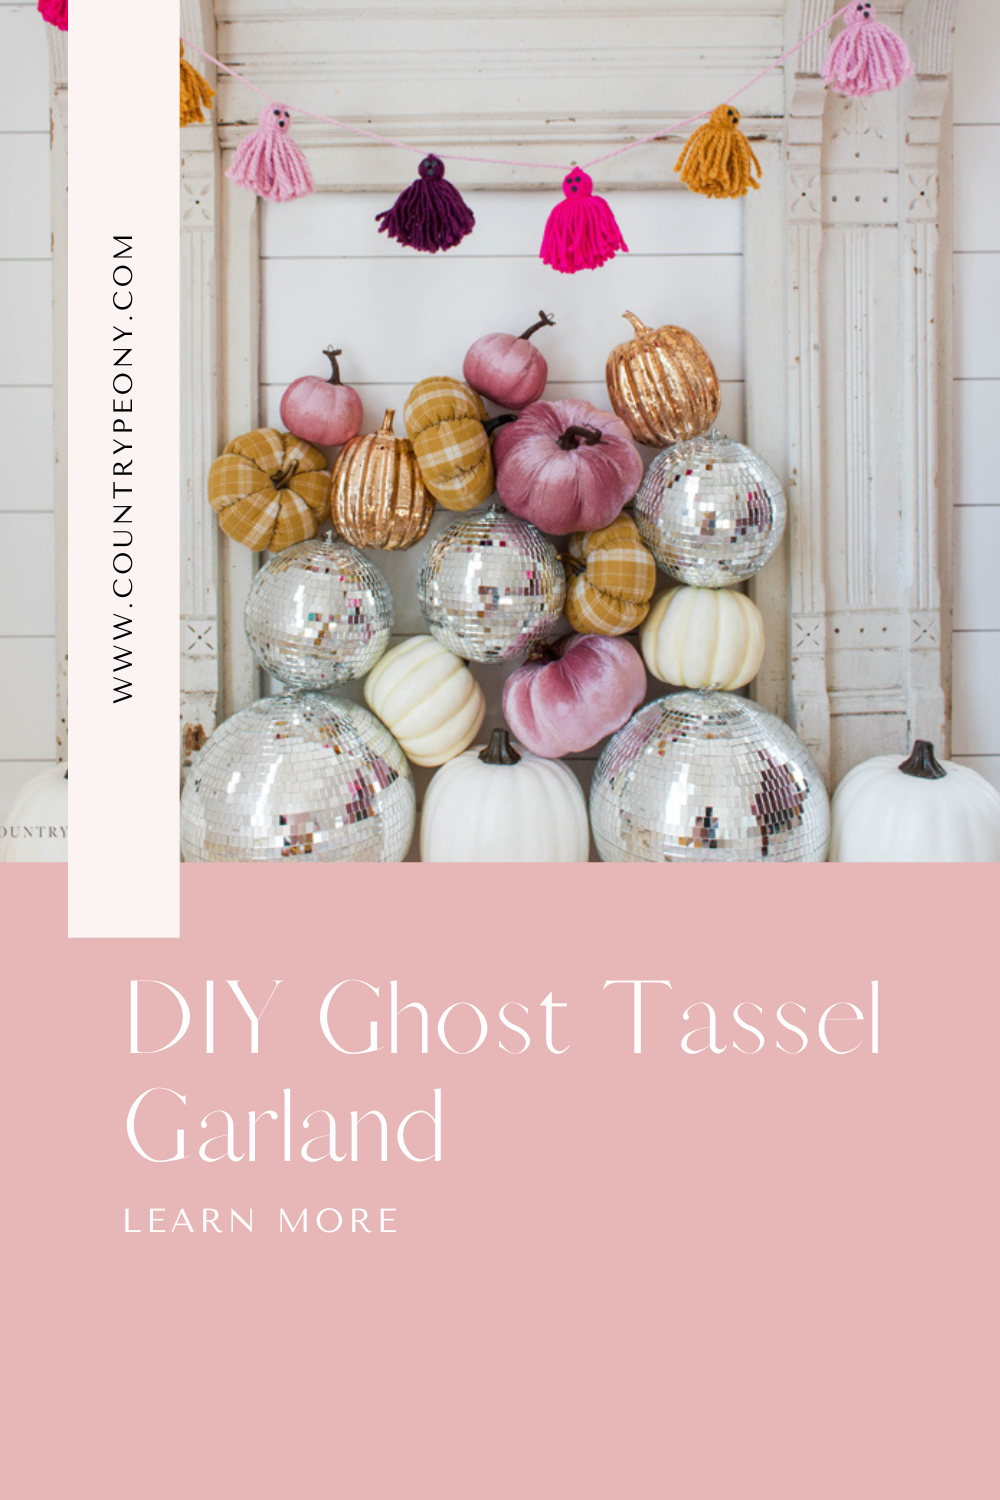 How To Make Ghost Tassels - My Name Is Snickerdoodle